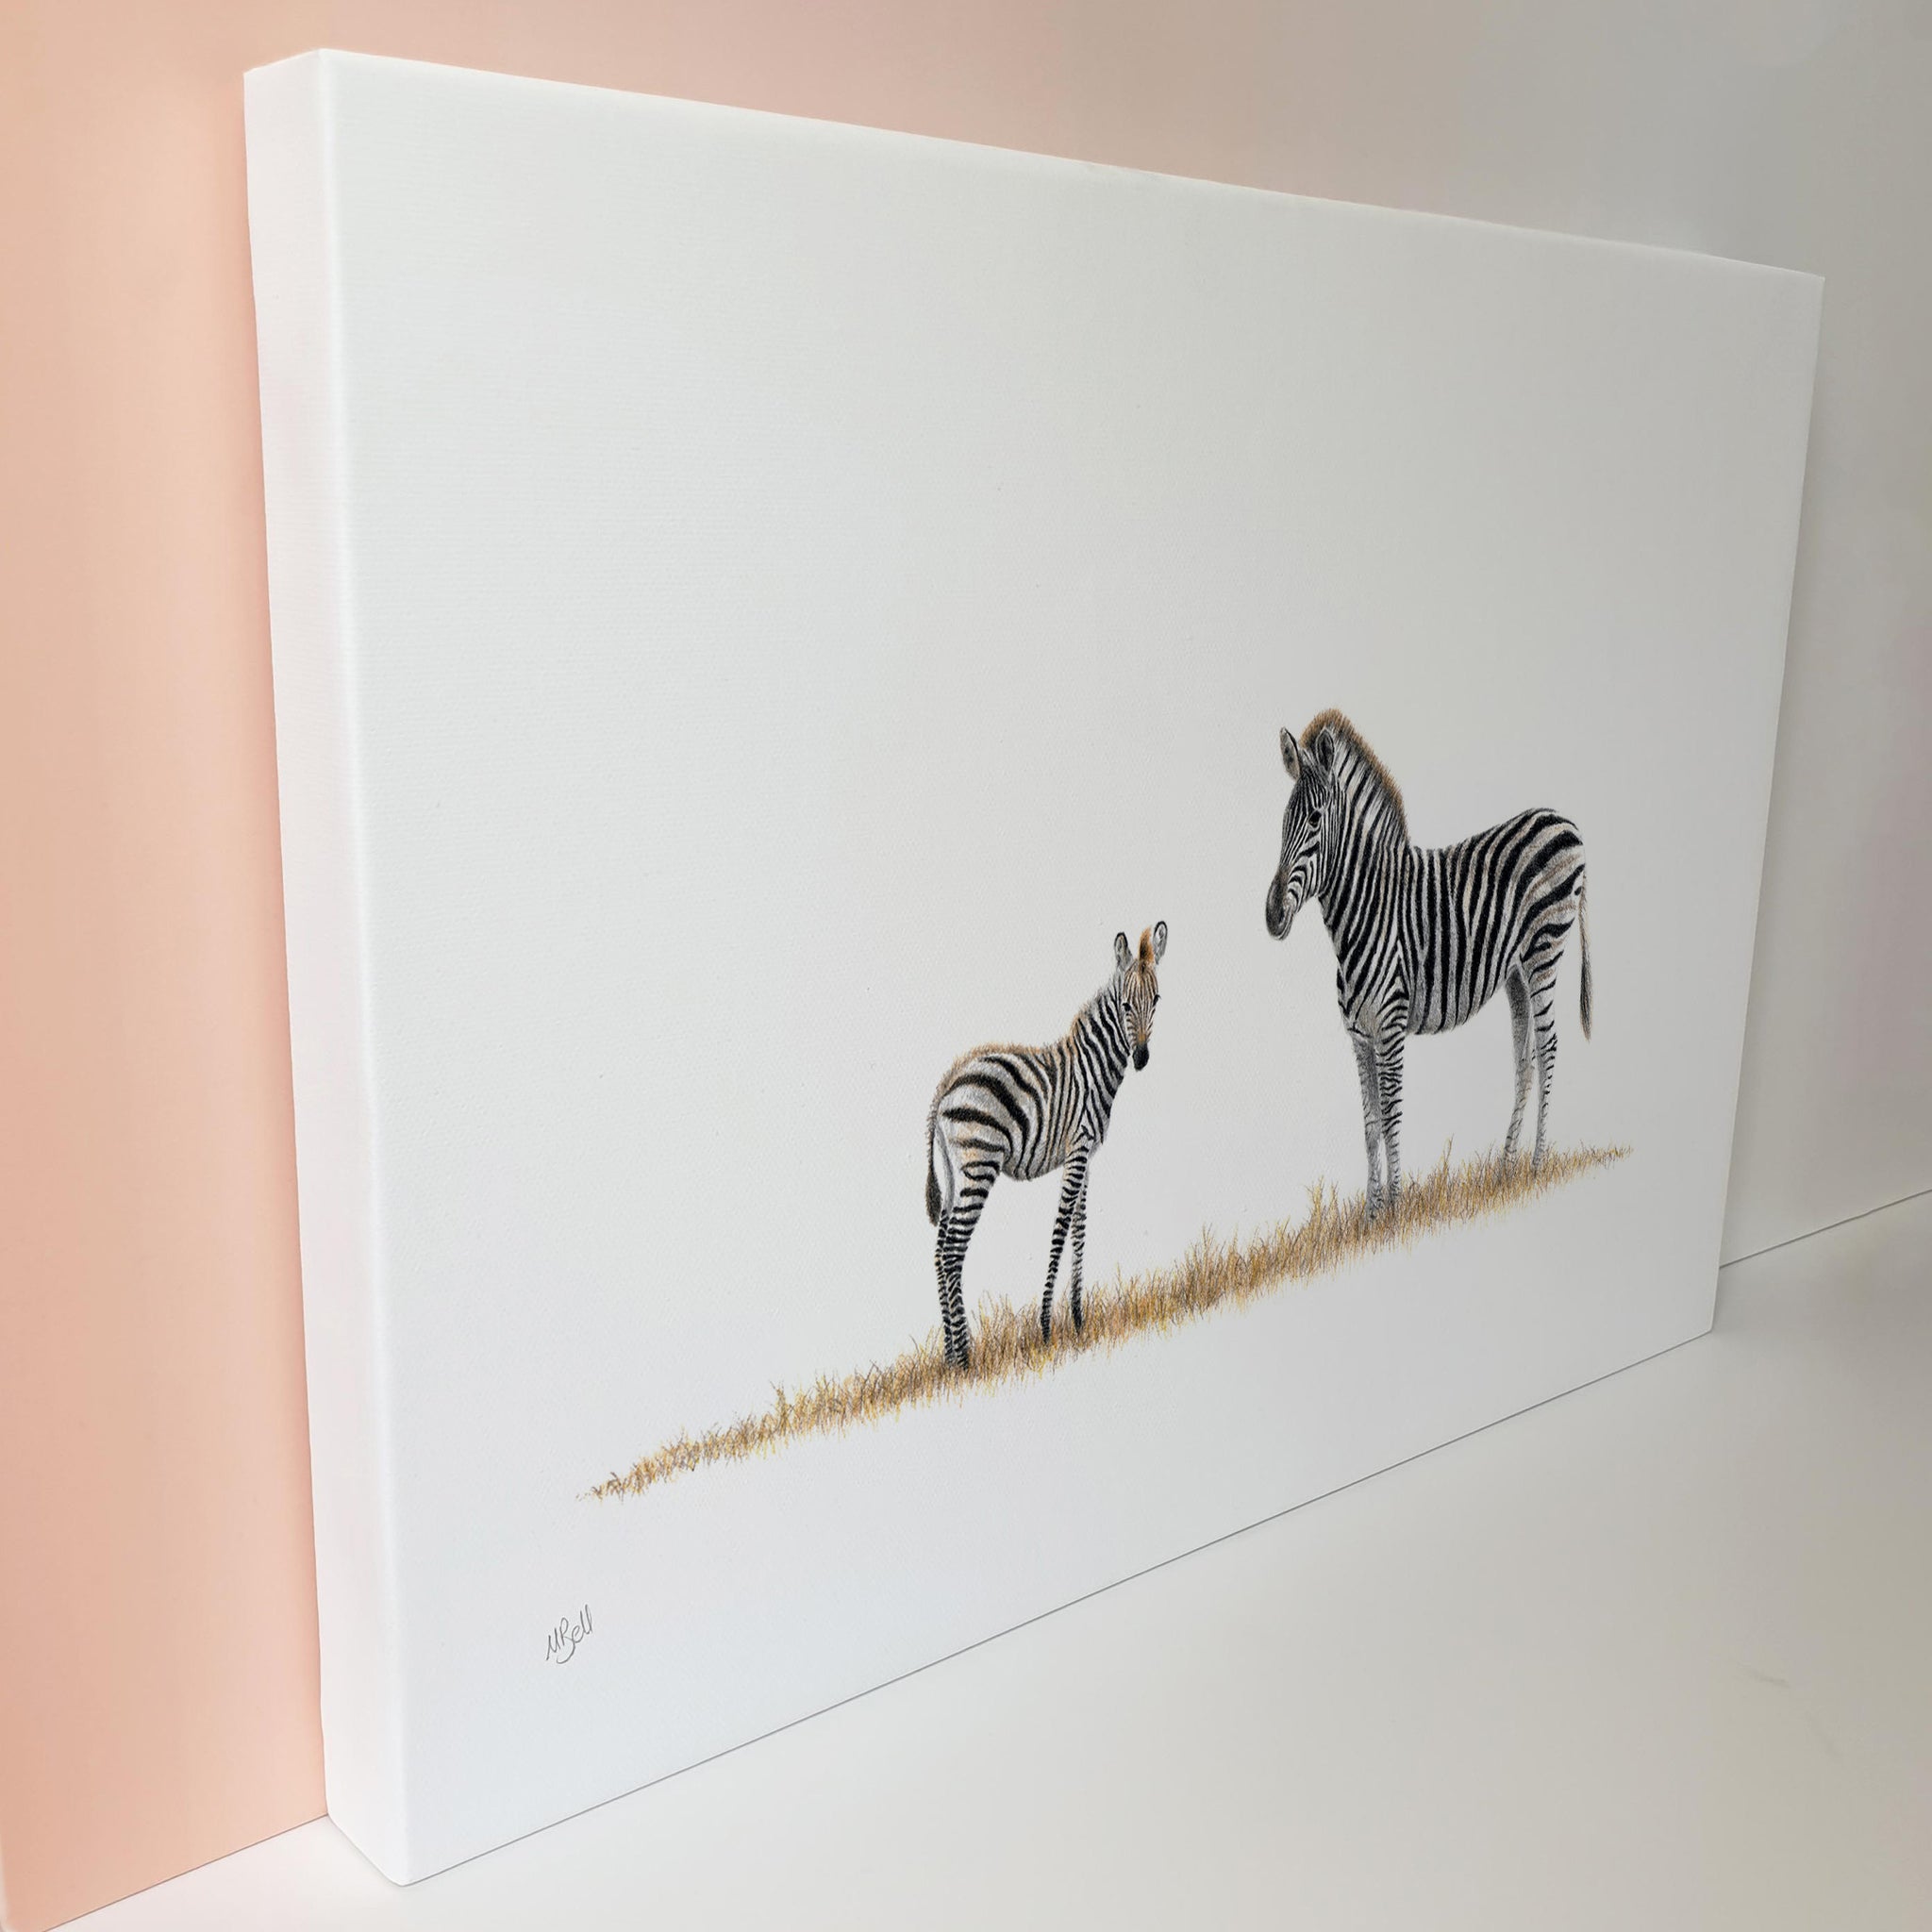 Mother and baby zebras African wildlife art canvas print